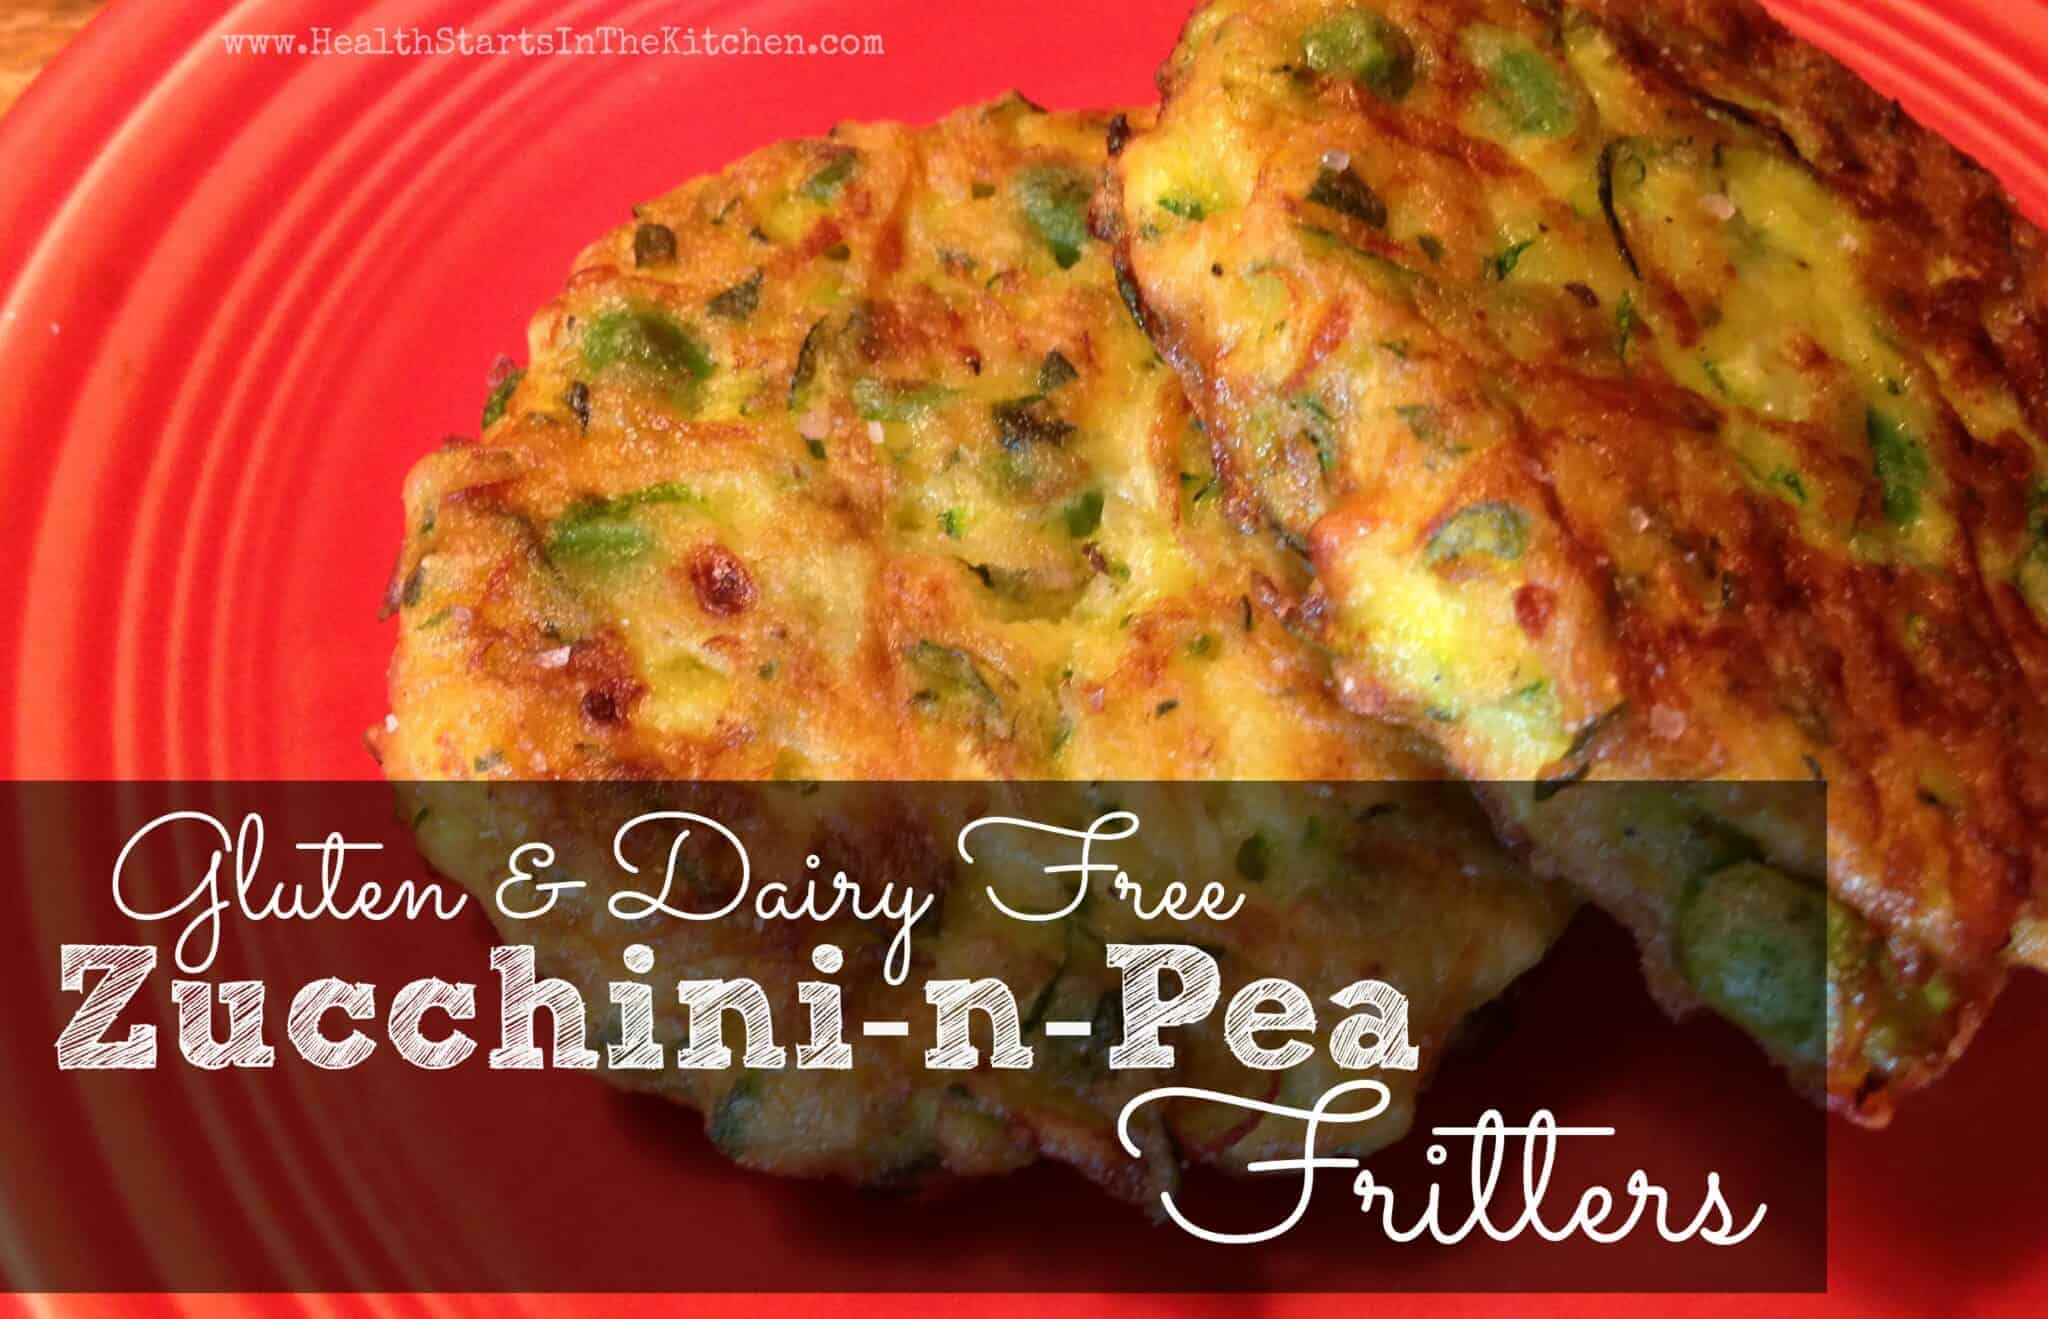 zucchini and pea fritters